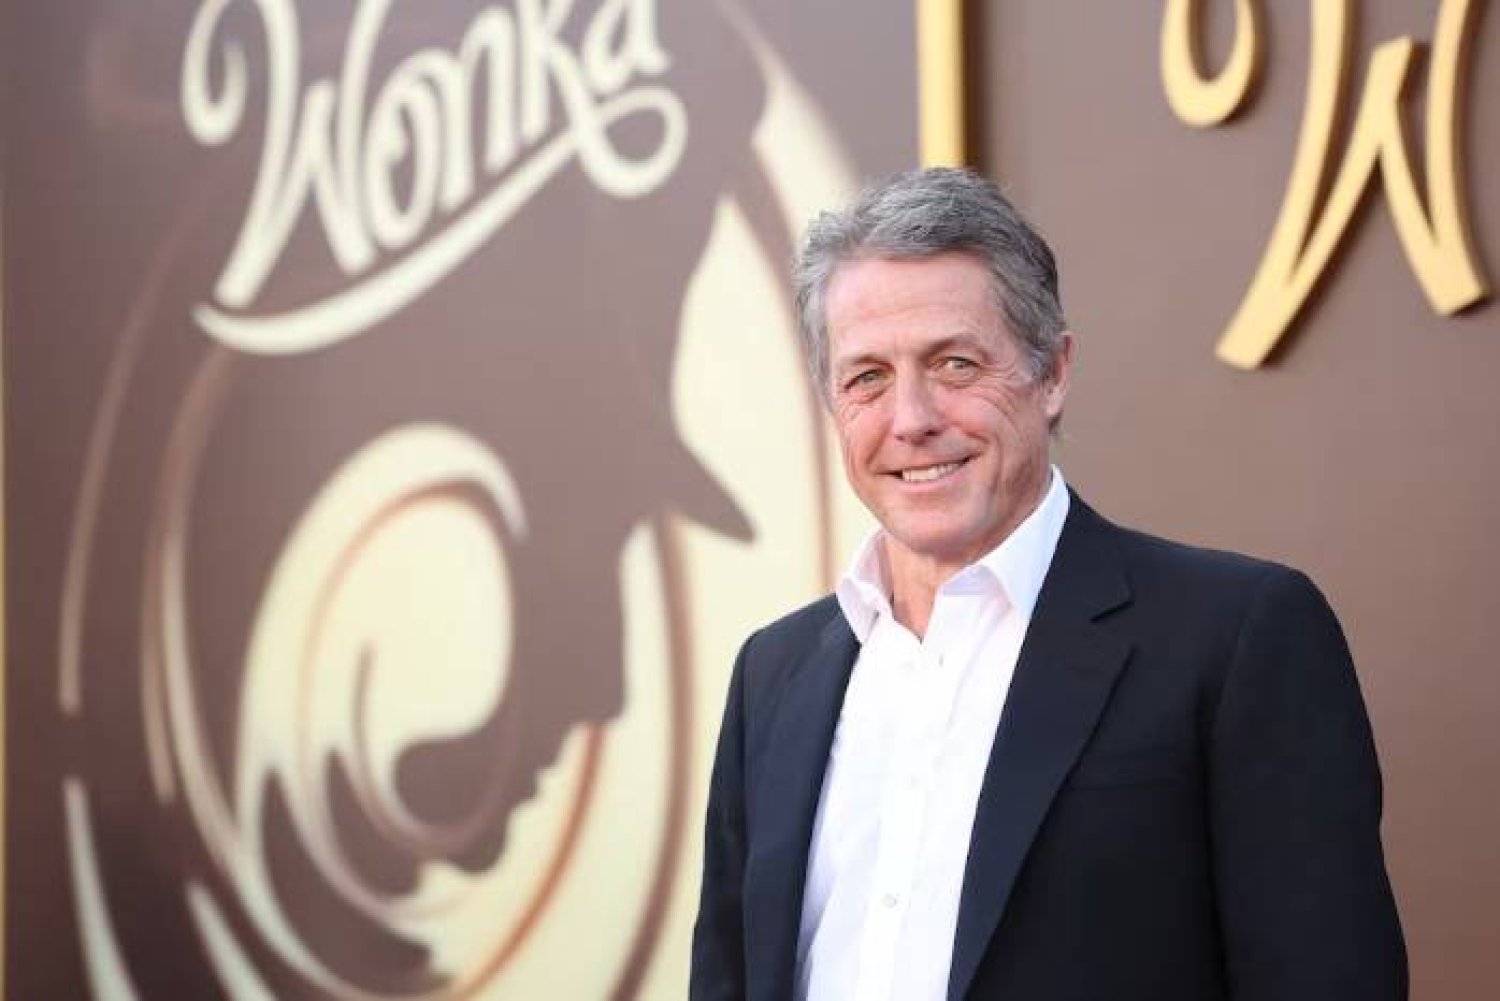 Cast member Hugh Grant attends a premiere for the film Wonka in Los Angeles, California, US December 10, 2023. REUTERS/Mario Anzuoni